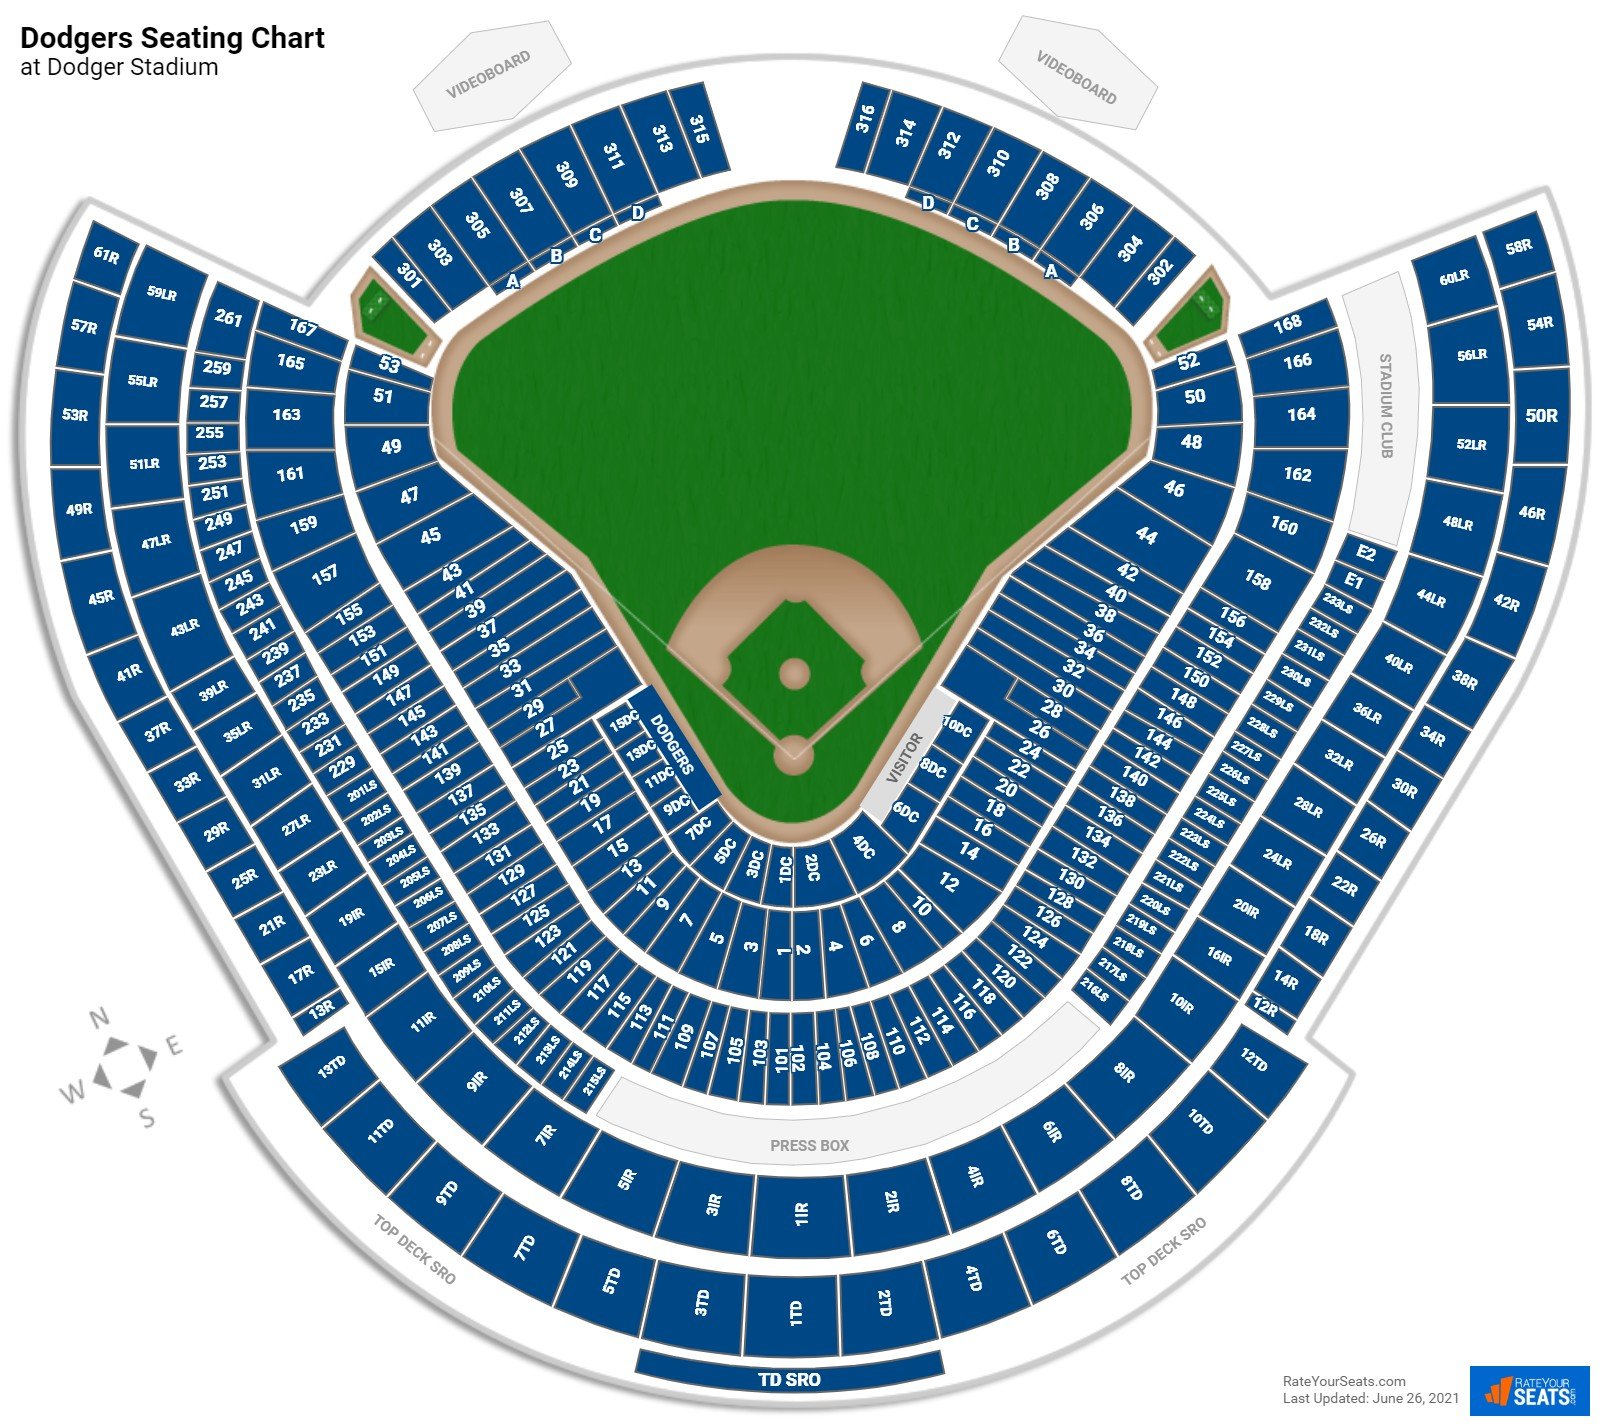 Los Angeles Dodgers Seating Chart at Dodger Stadium